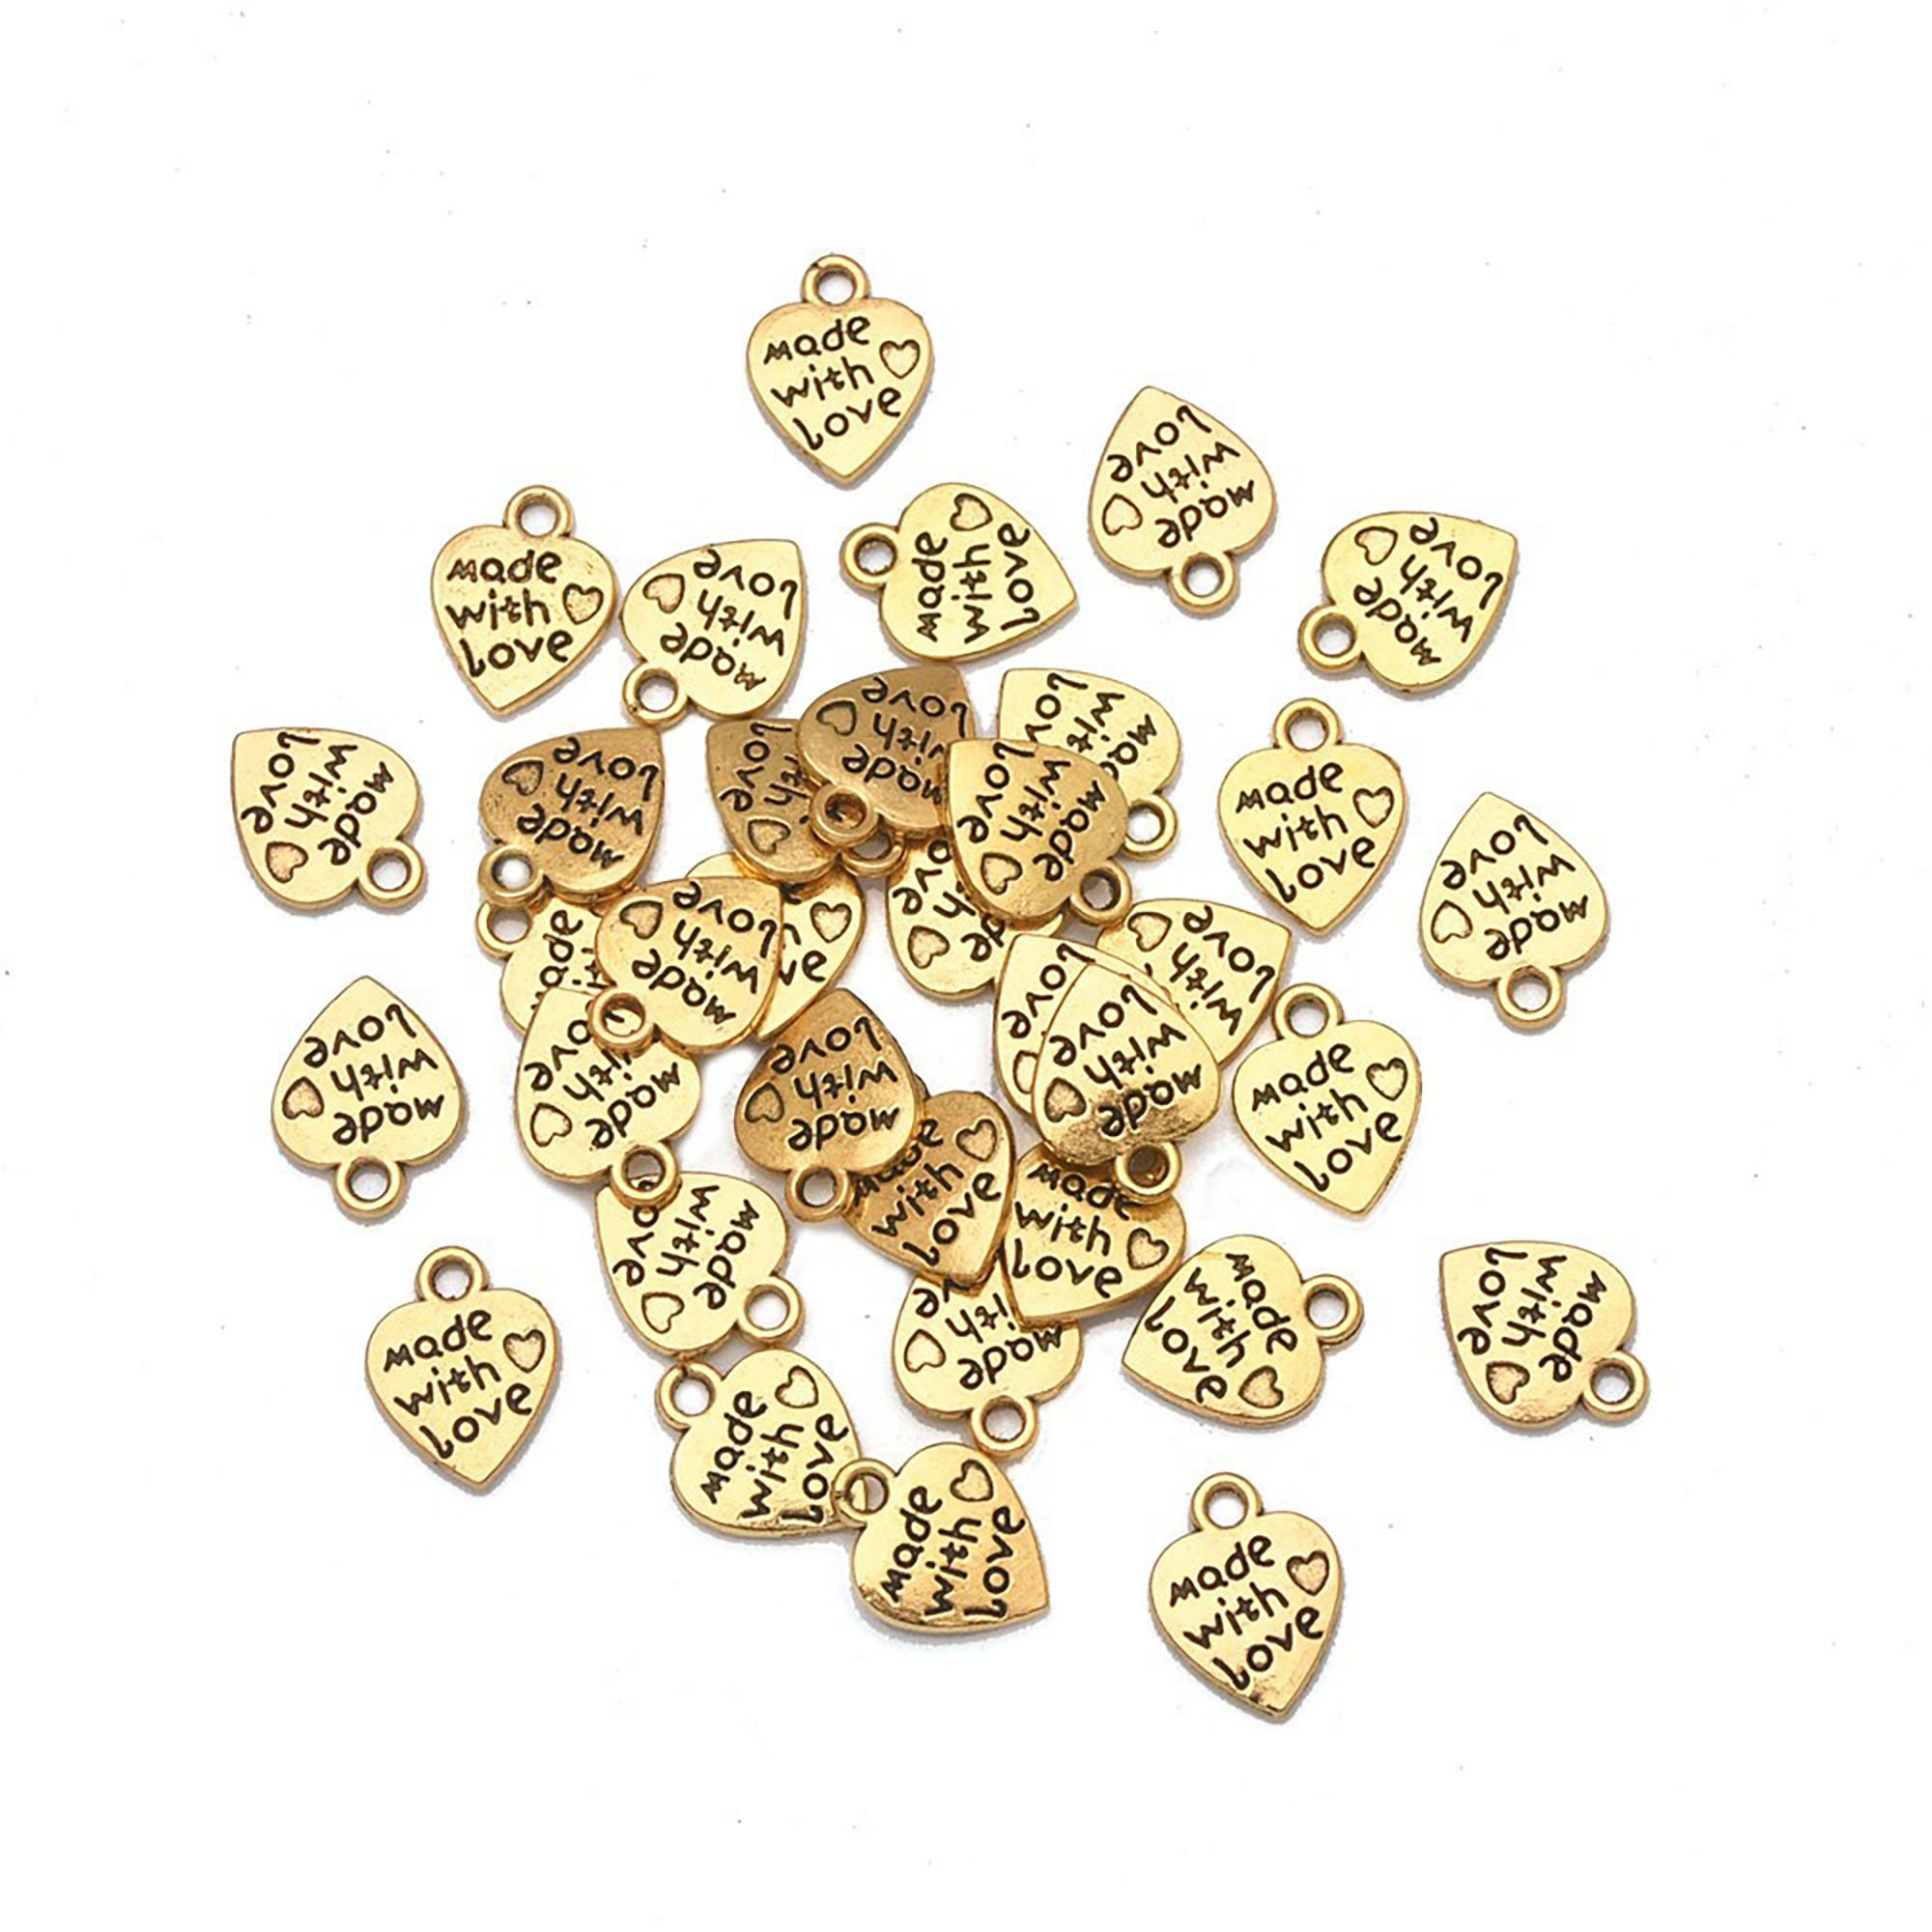  DanLingJewelry 10 pcs Craft Supplies Real 18K Gold Plated Beads  Charms Pendants Word Love Charms for Jewelry Making Crafting : Arts, Crafts  & Sewing